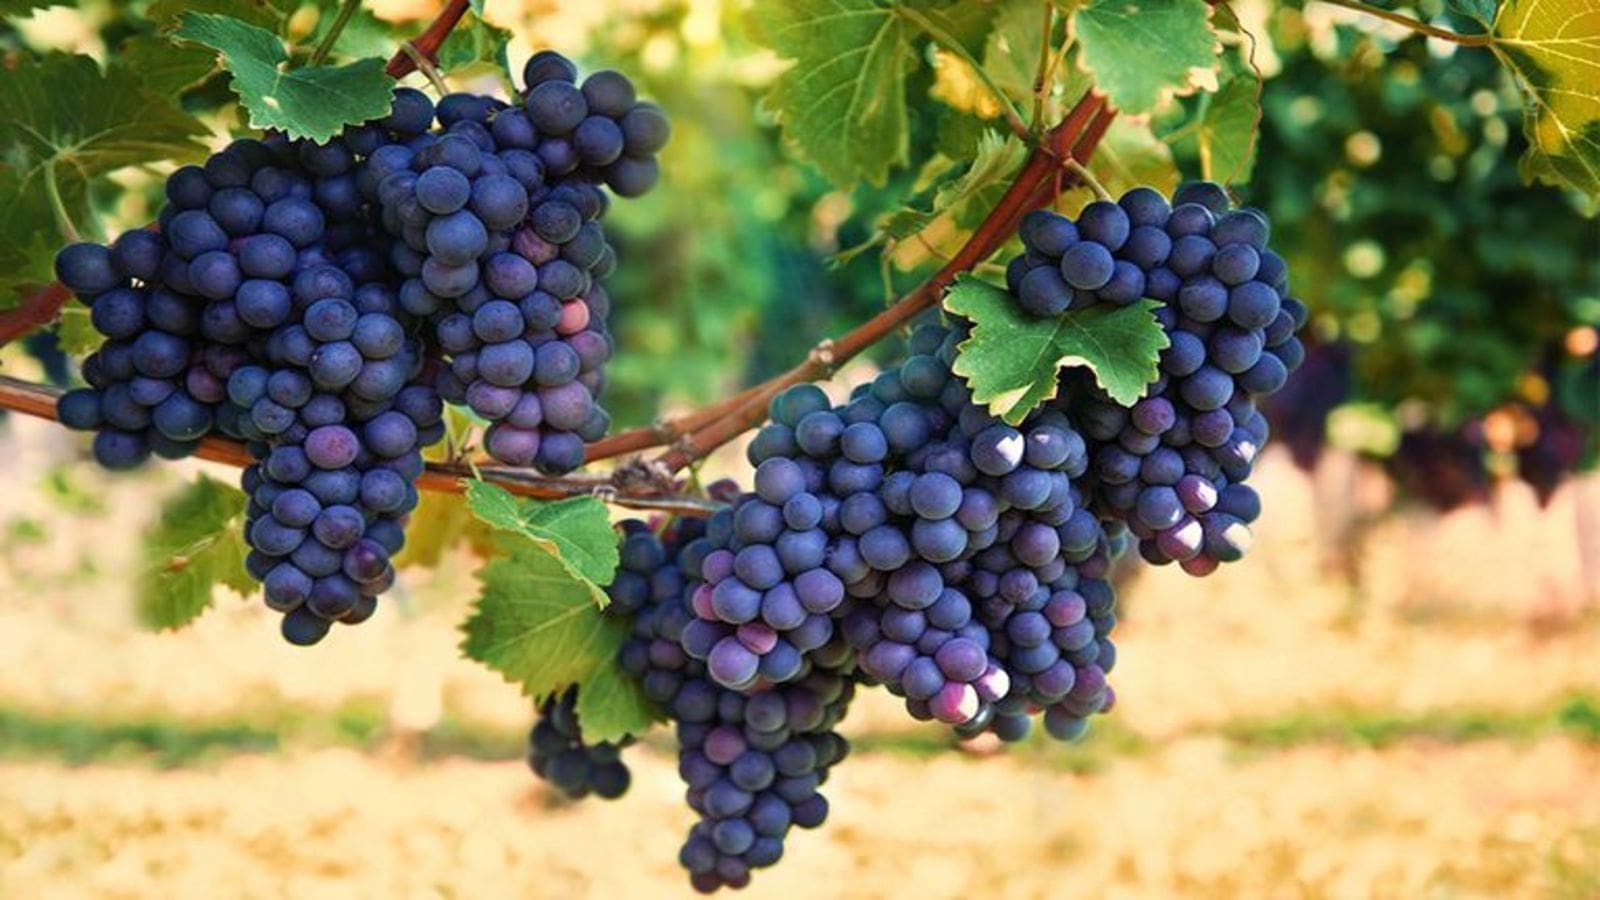 Tanzania Bureau of Standards trains grape farmers on required product standards